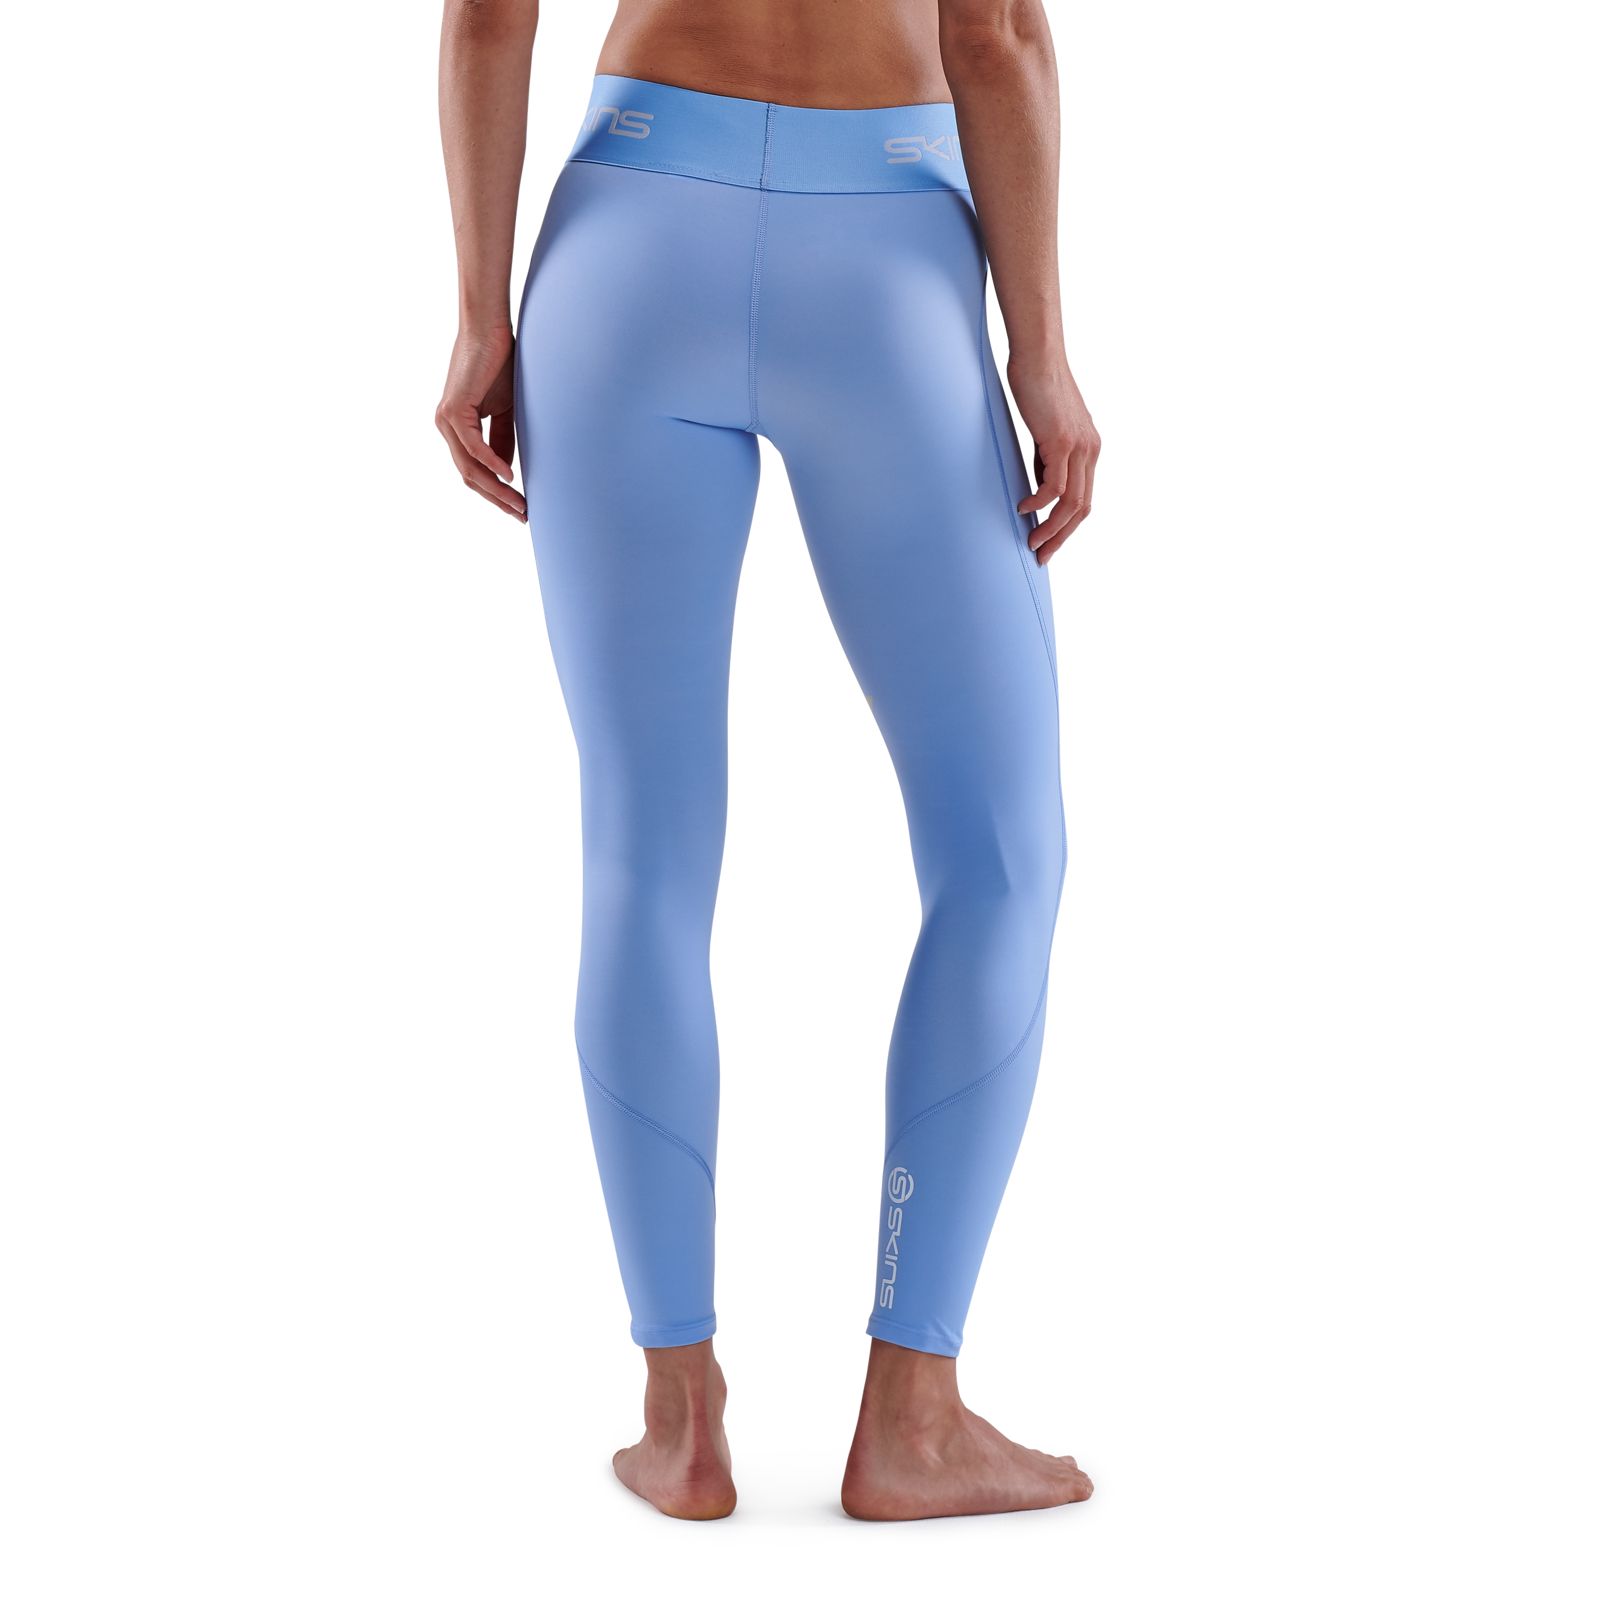 SKINS SERIES-1 YOUTH LONG TIGHTS SKY BLUE - SKINS Compression UK